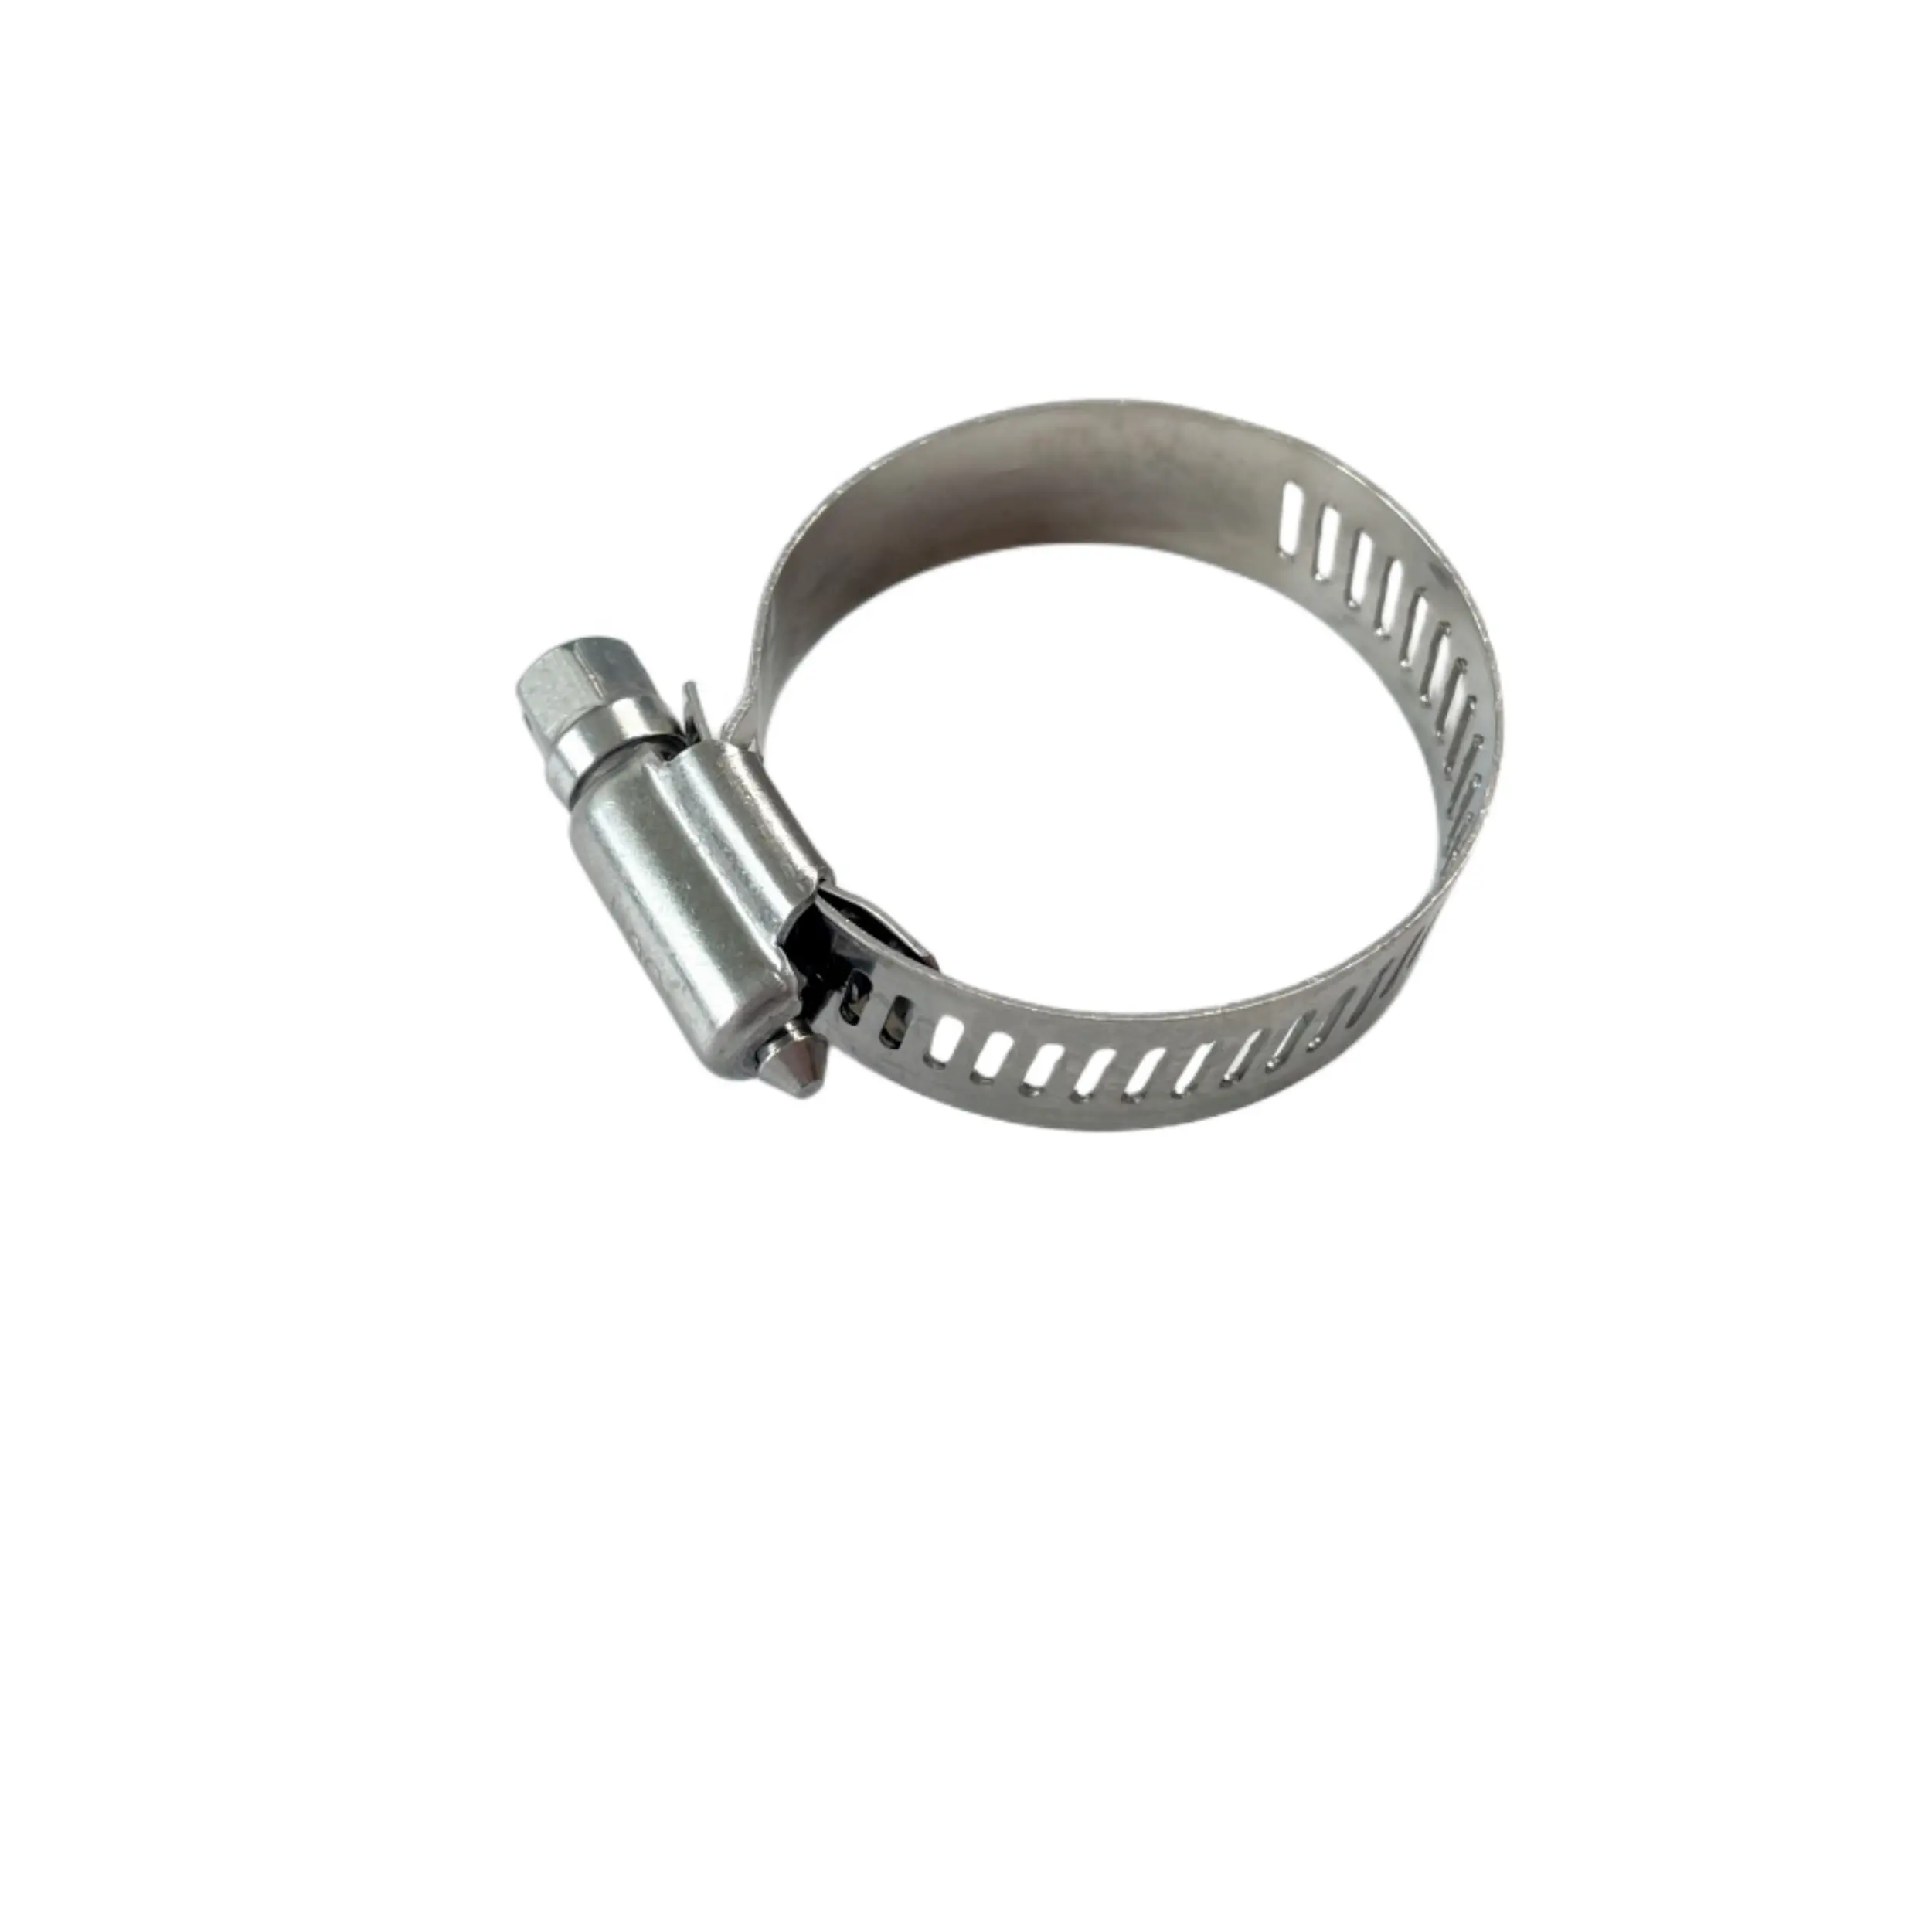 Wholesales Customized Hardware Pipe Clamps Stainless Steel Wholesizes American Throat Hoop